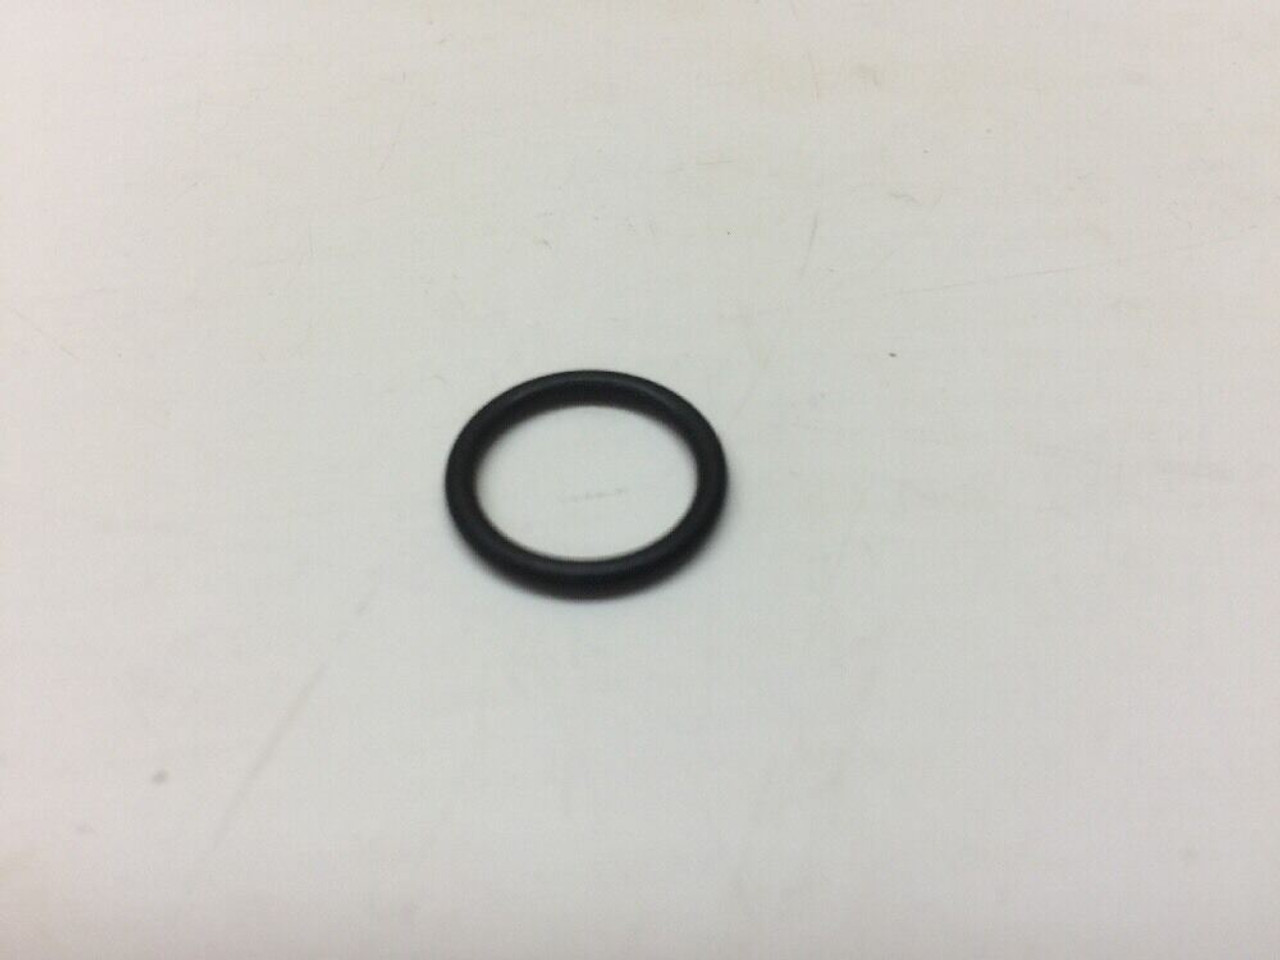 O-Ring M83461/1-014 SAE Black Rubber C-5 F-16 Aircraft Lot of 10